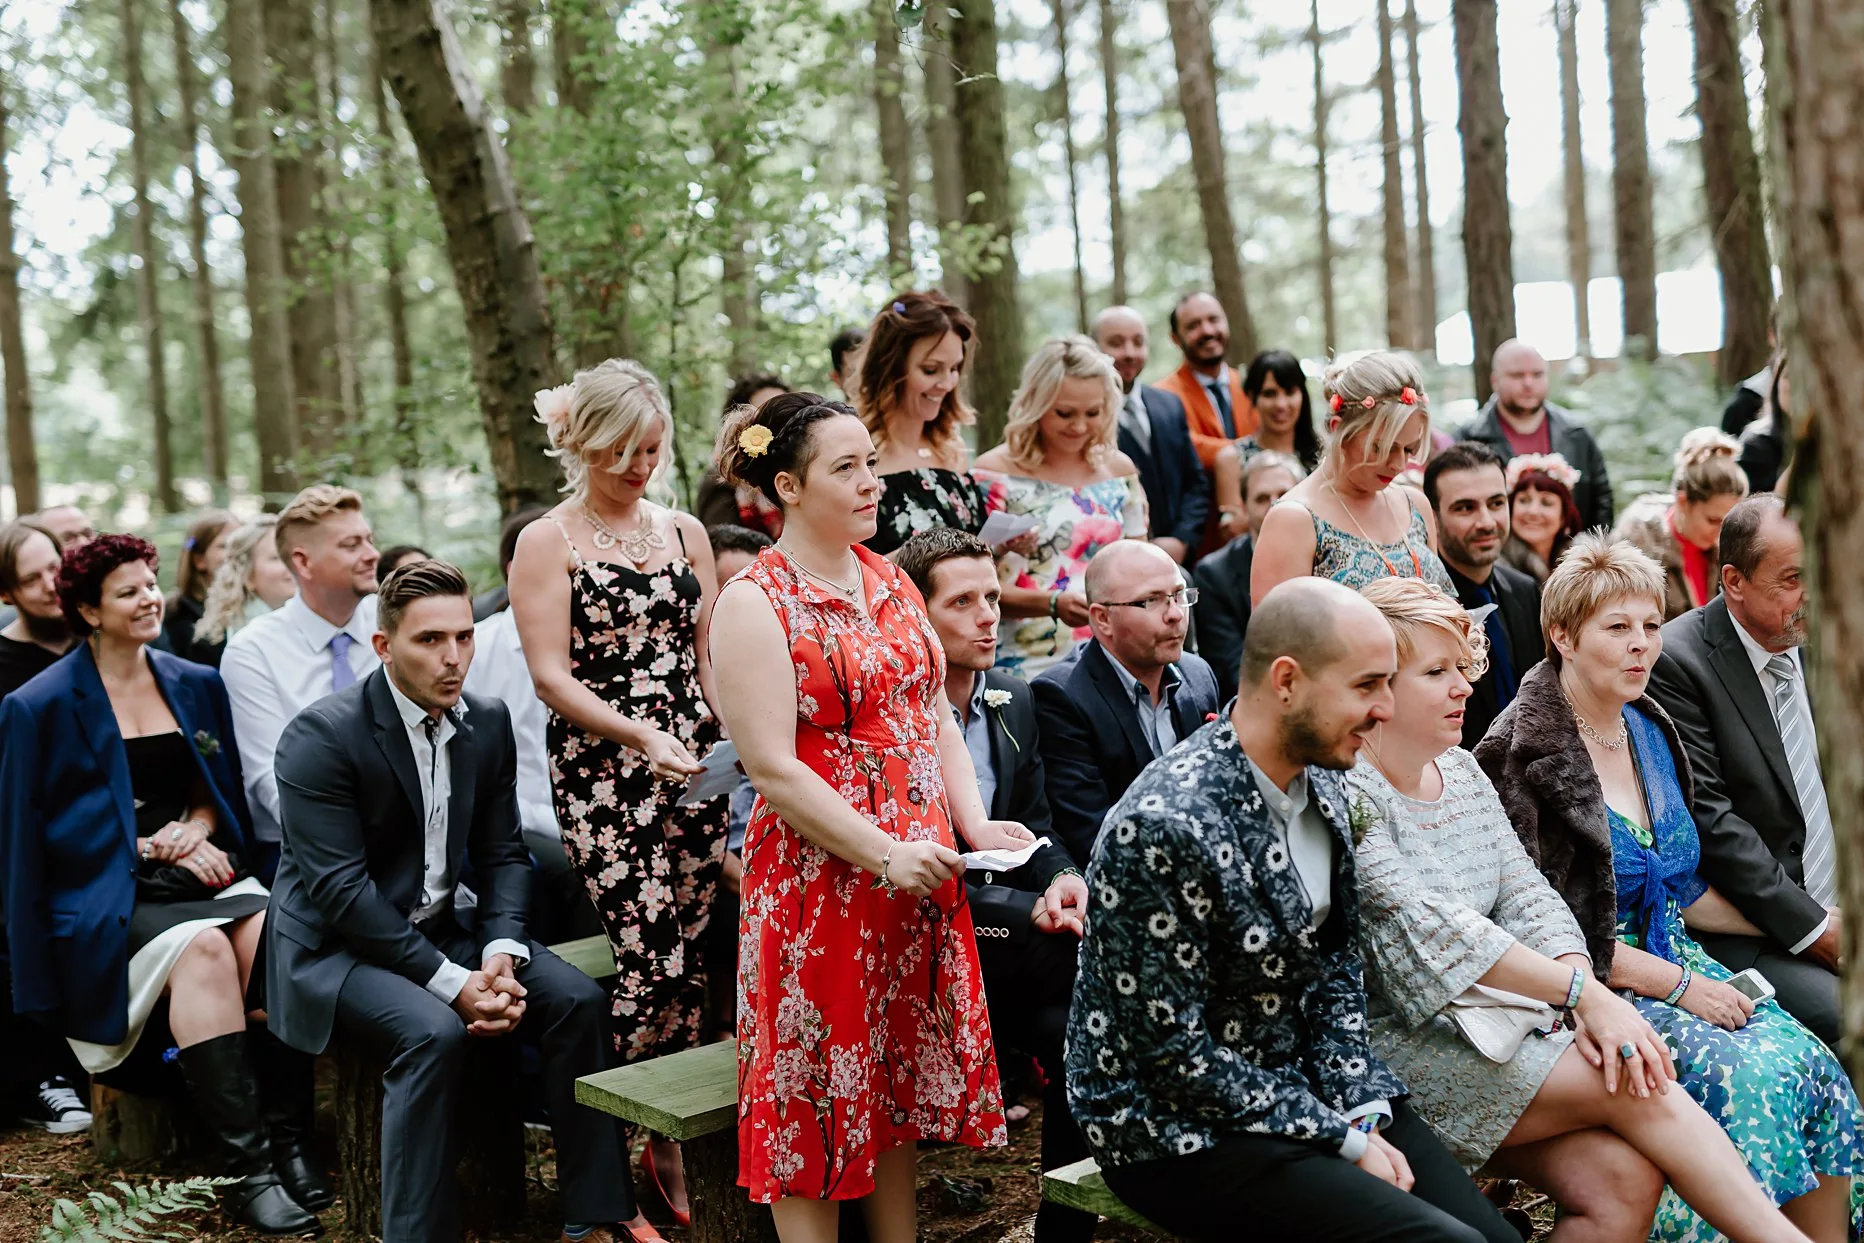 Wedding guests stood up during wedding ceremony singing. The wedding ceremony is outside in the woods at Camp Katur. Guests are surrounded by trees.